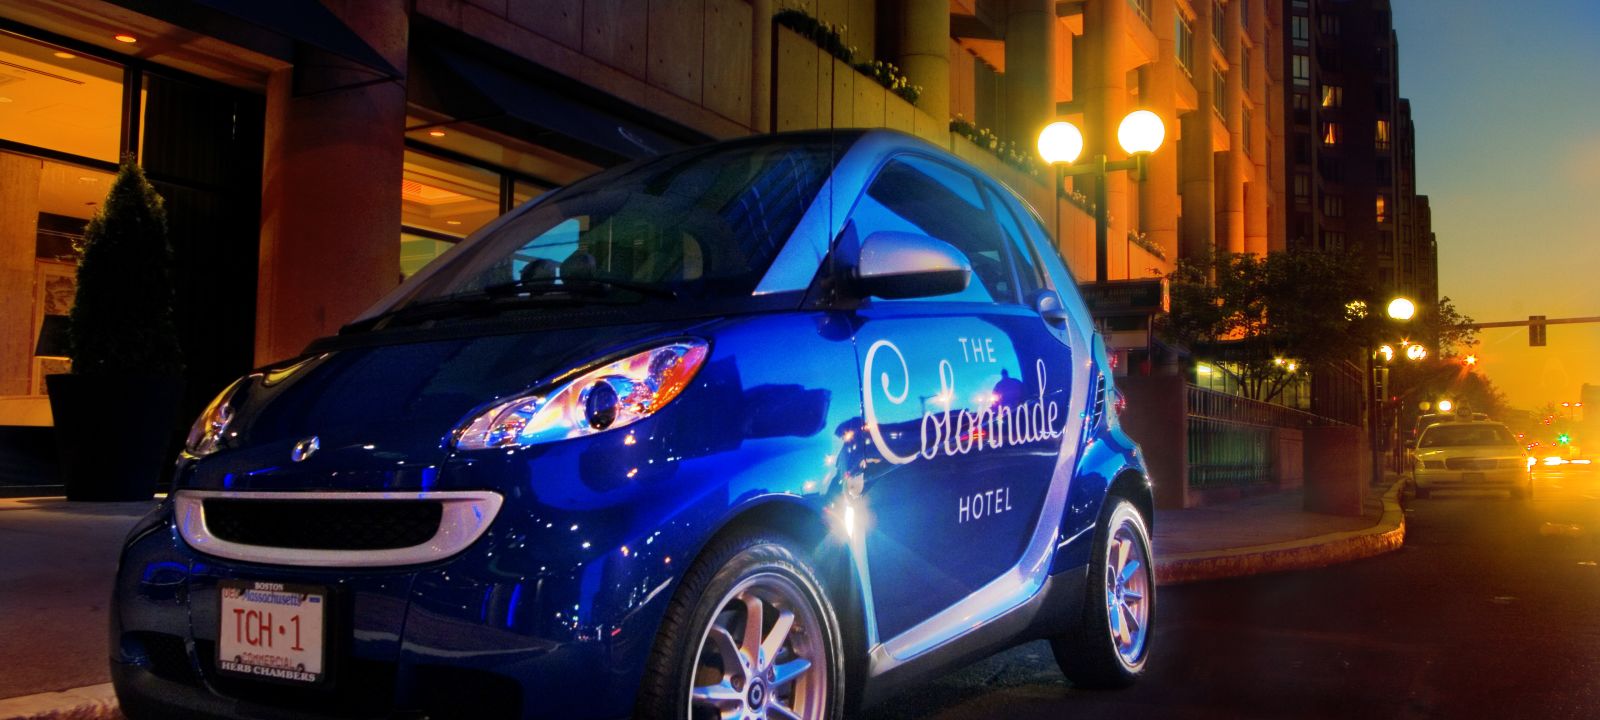 The Colonnade Hotel smart car